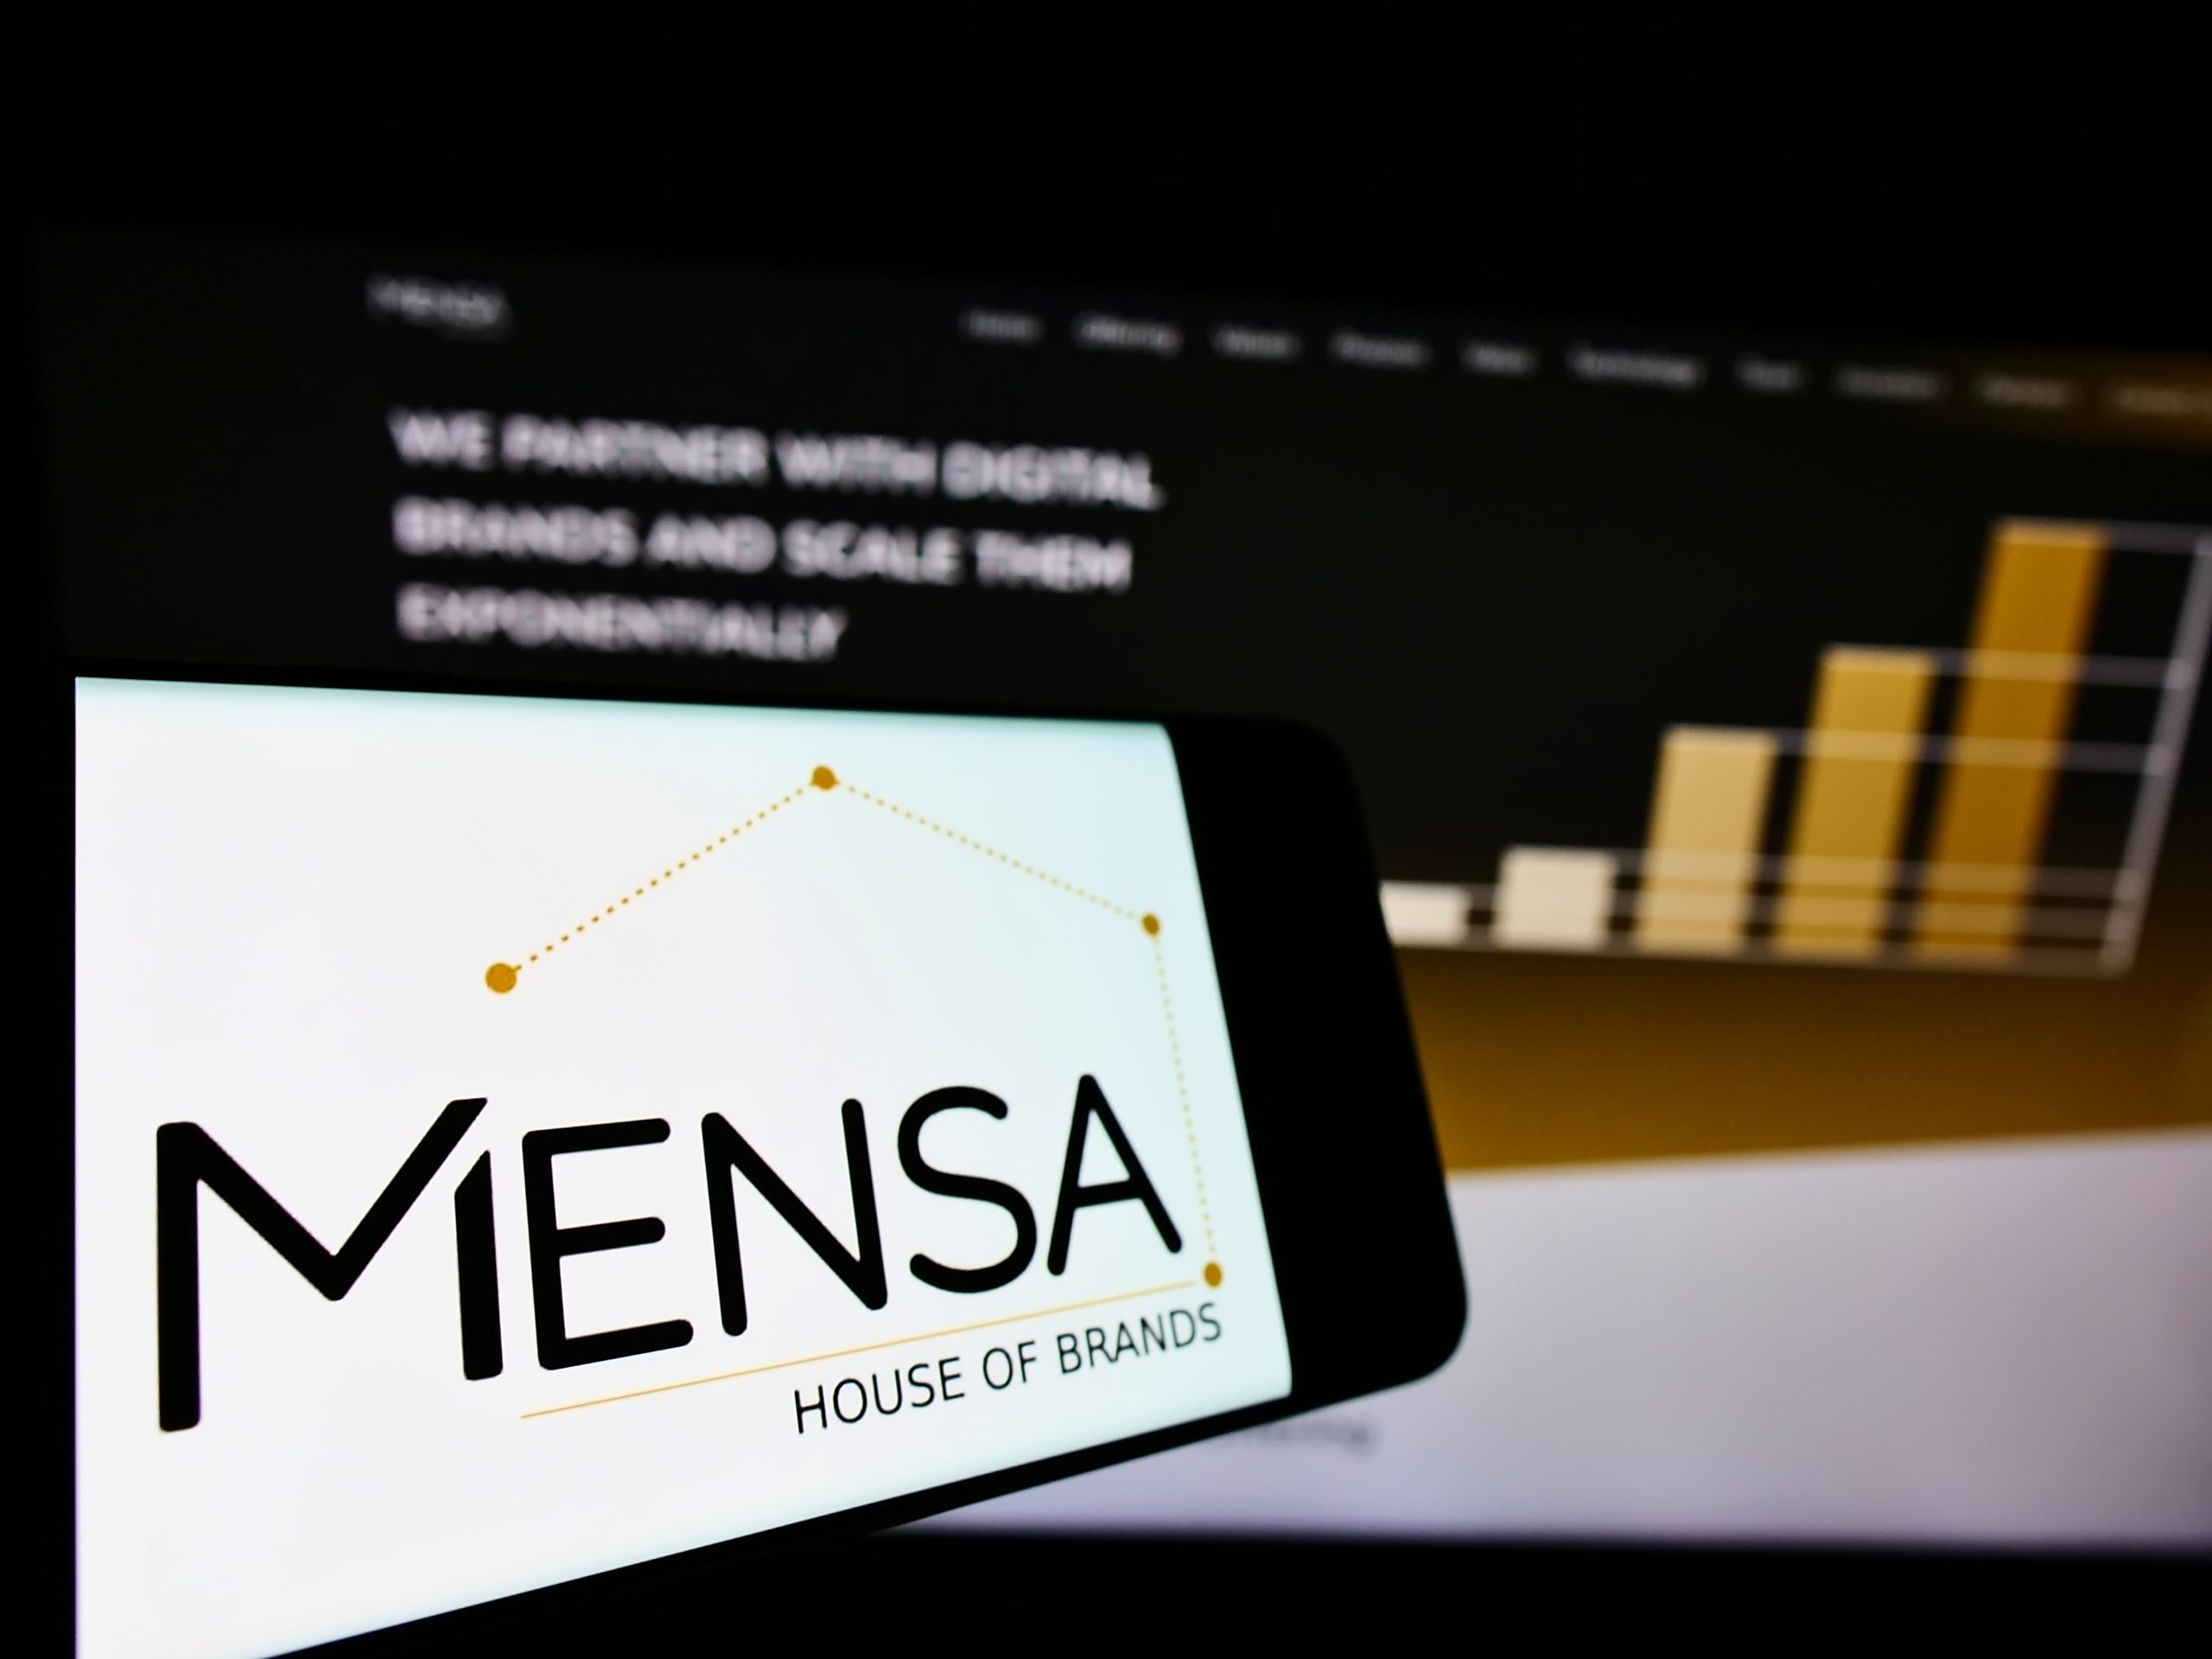 Indian Mensa Brands has become a Unicorn in record time